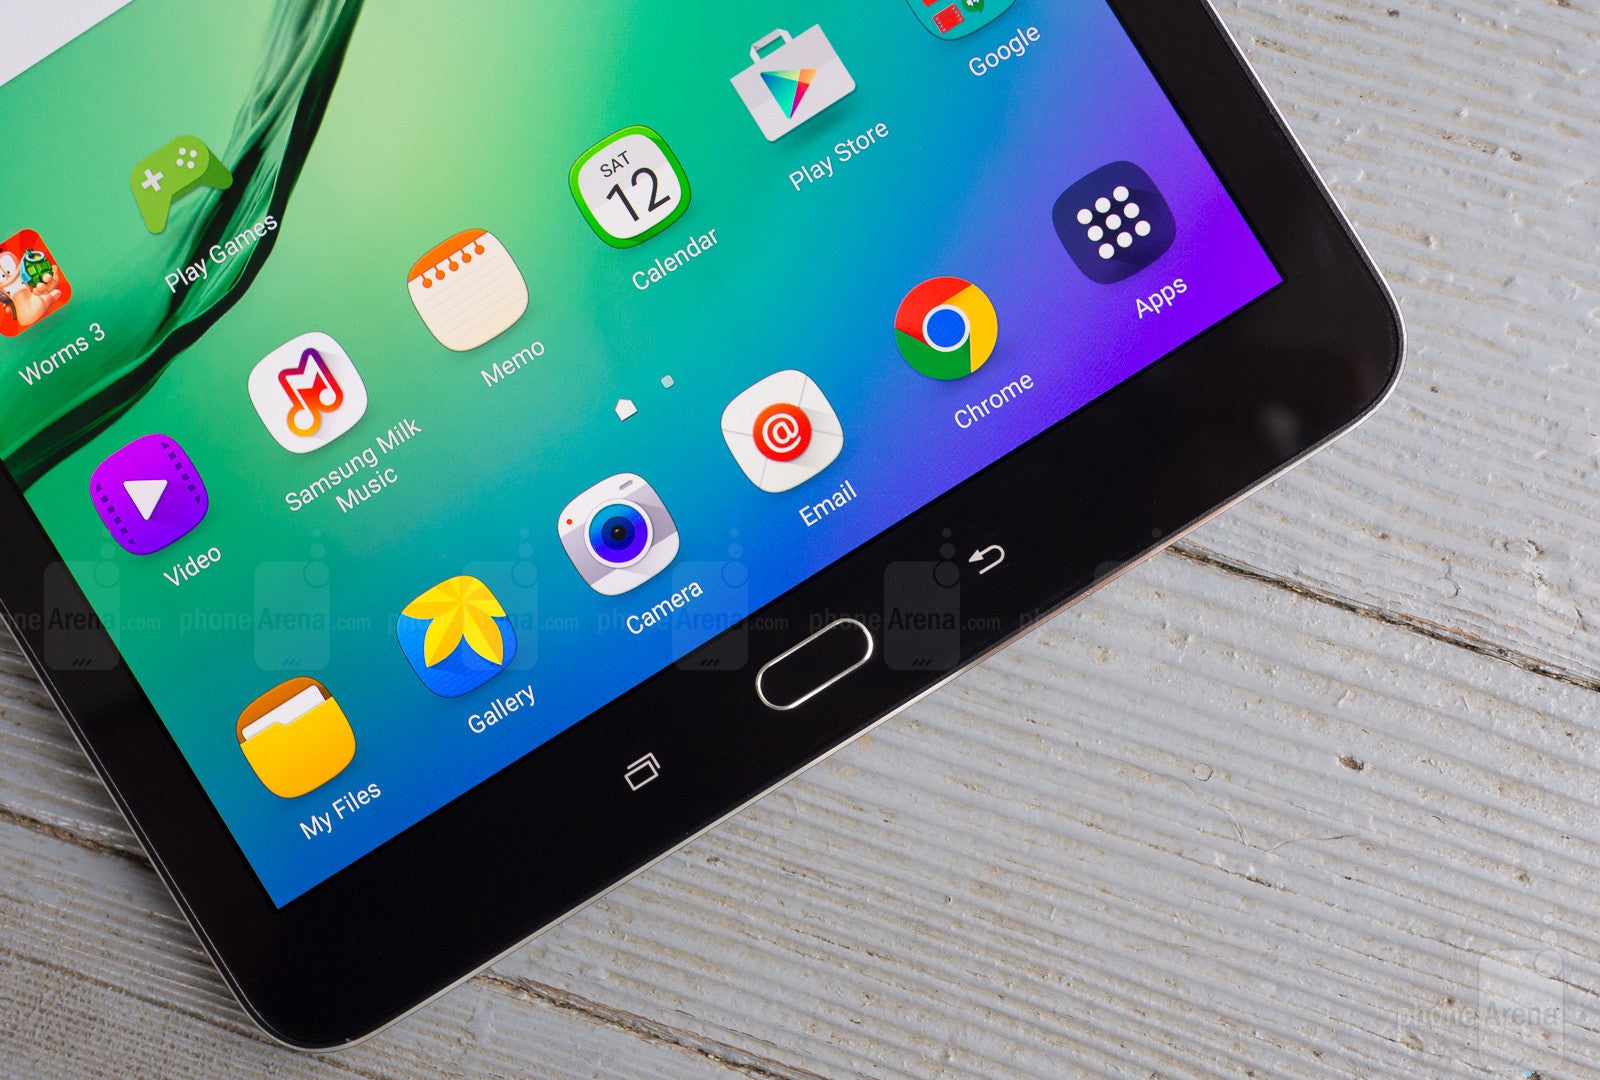 Samsung's Galaxy Tab S2 9.7-inch - Smoking Samsung tablet forces flight to make an emergency landing